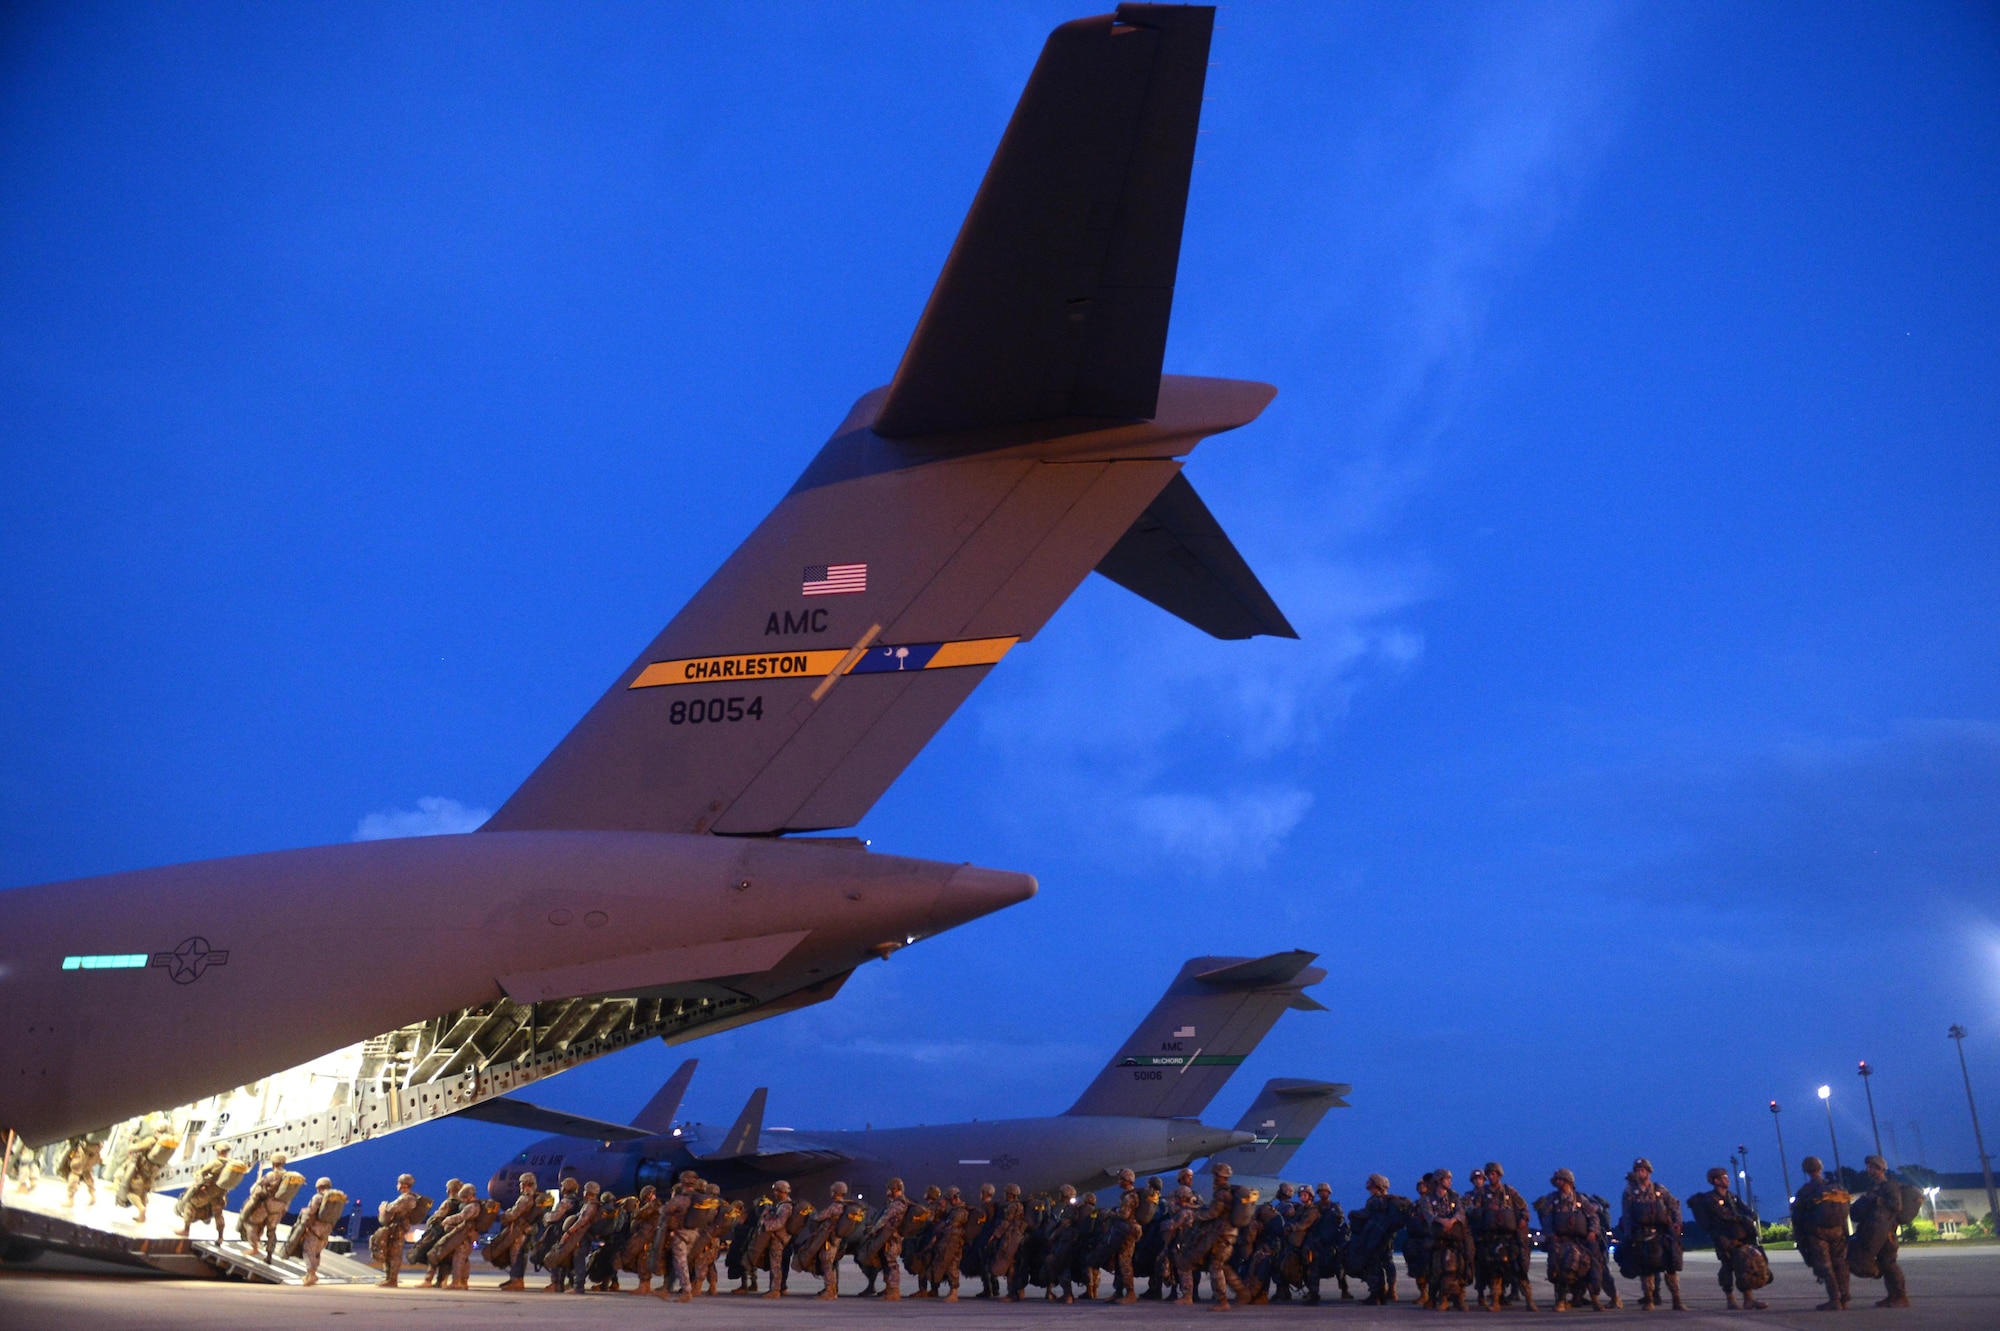 U.S. Army members from the 82nd Airborne Division load onto a C-17 Globemaster III aircraft from Joint Base Lewis-McChord, W.A., during Battalion Mass-Tactical week at Pope Army Airfield, N.C., July 12, 2016. During mass-tactical week the Army and Air Force units work together to improve interoperability for worldwide crisis, contingency and humanitarian operations. (U.S. Air Force photo by Staff Sgt. Sandra Welch)